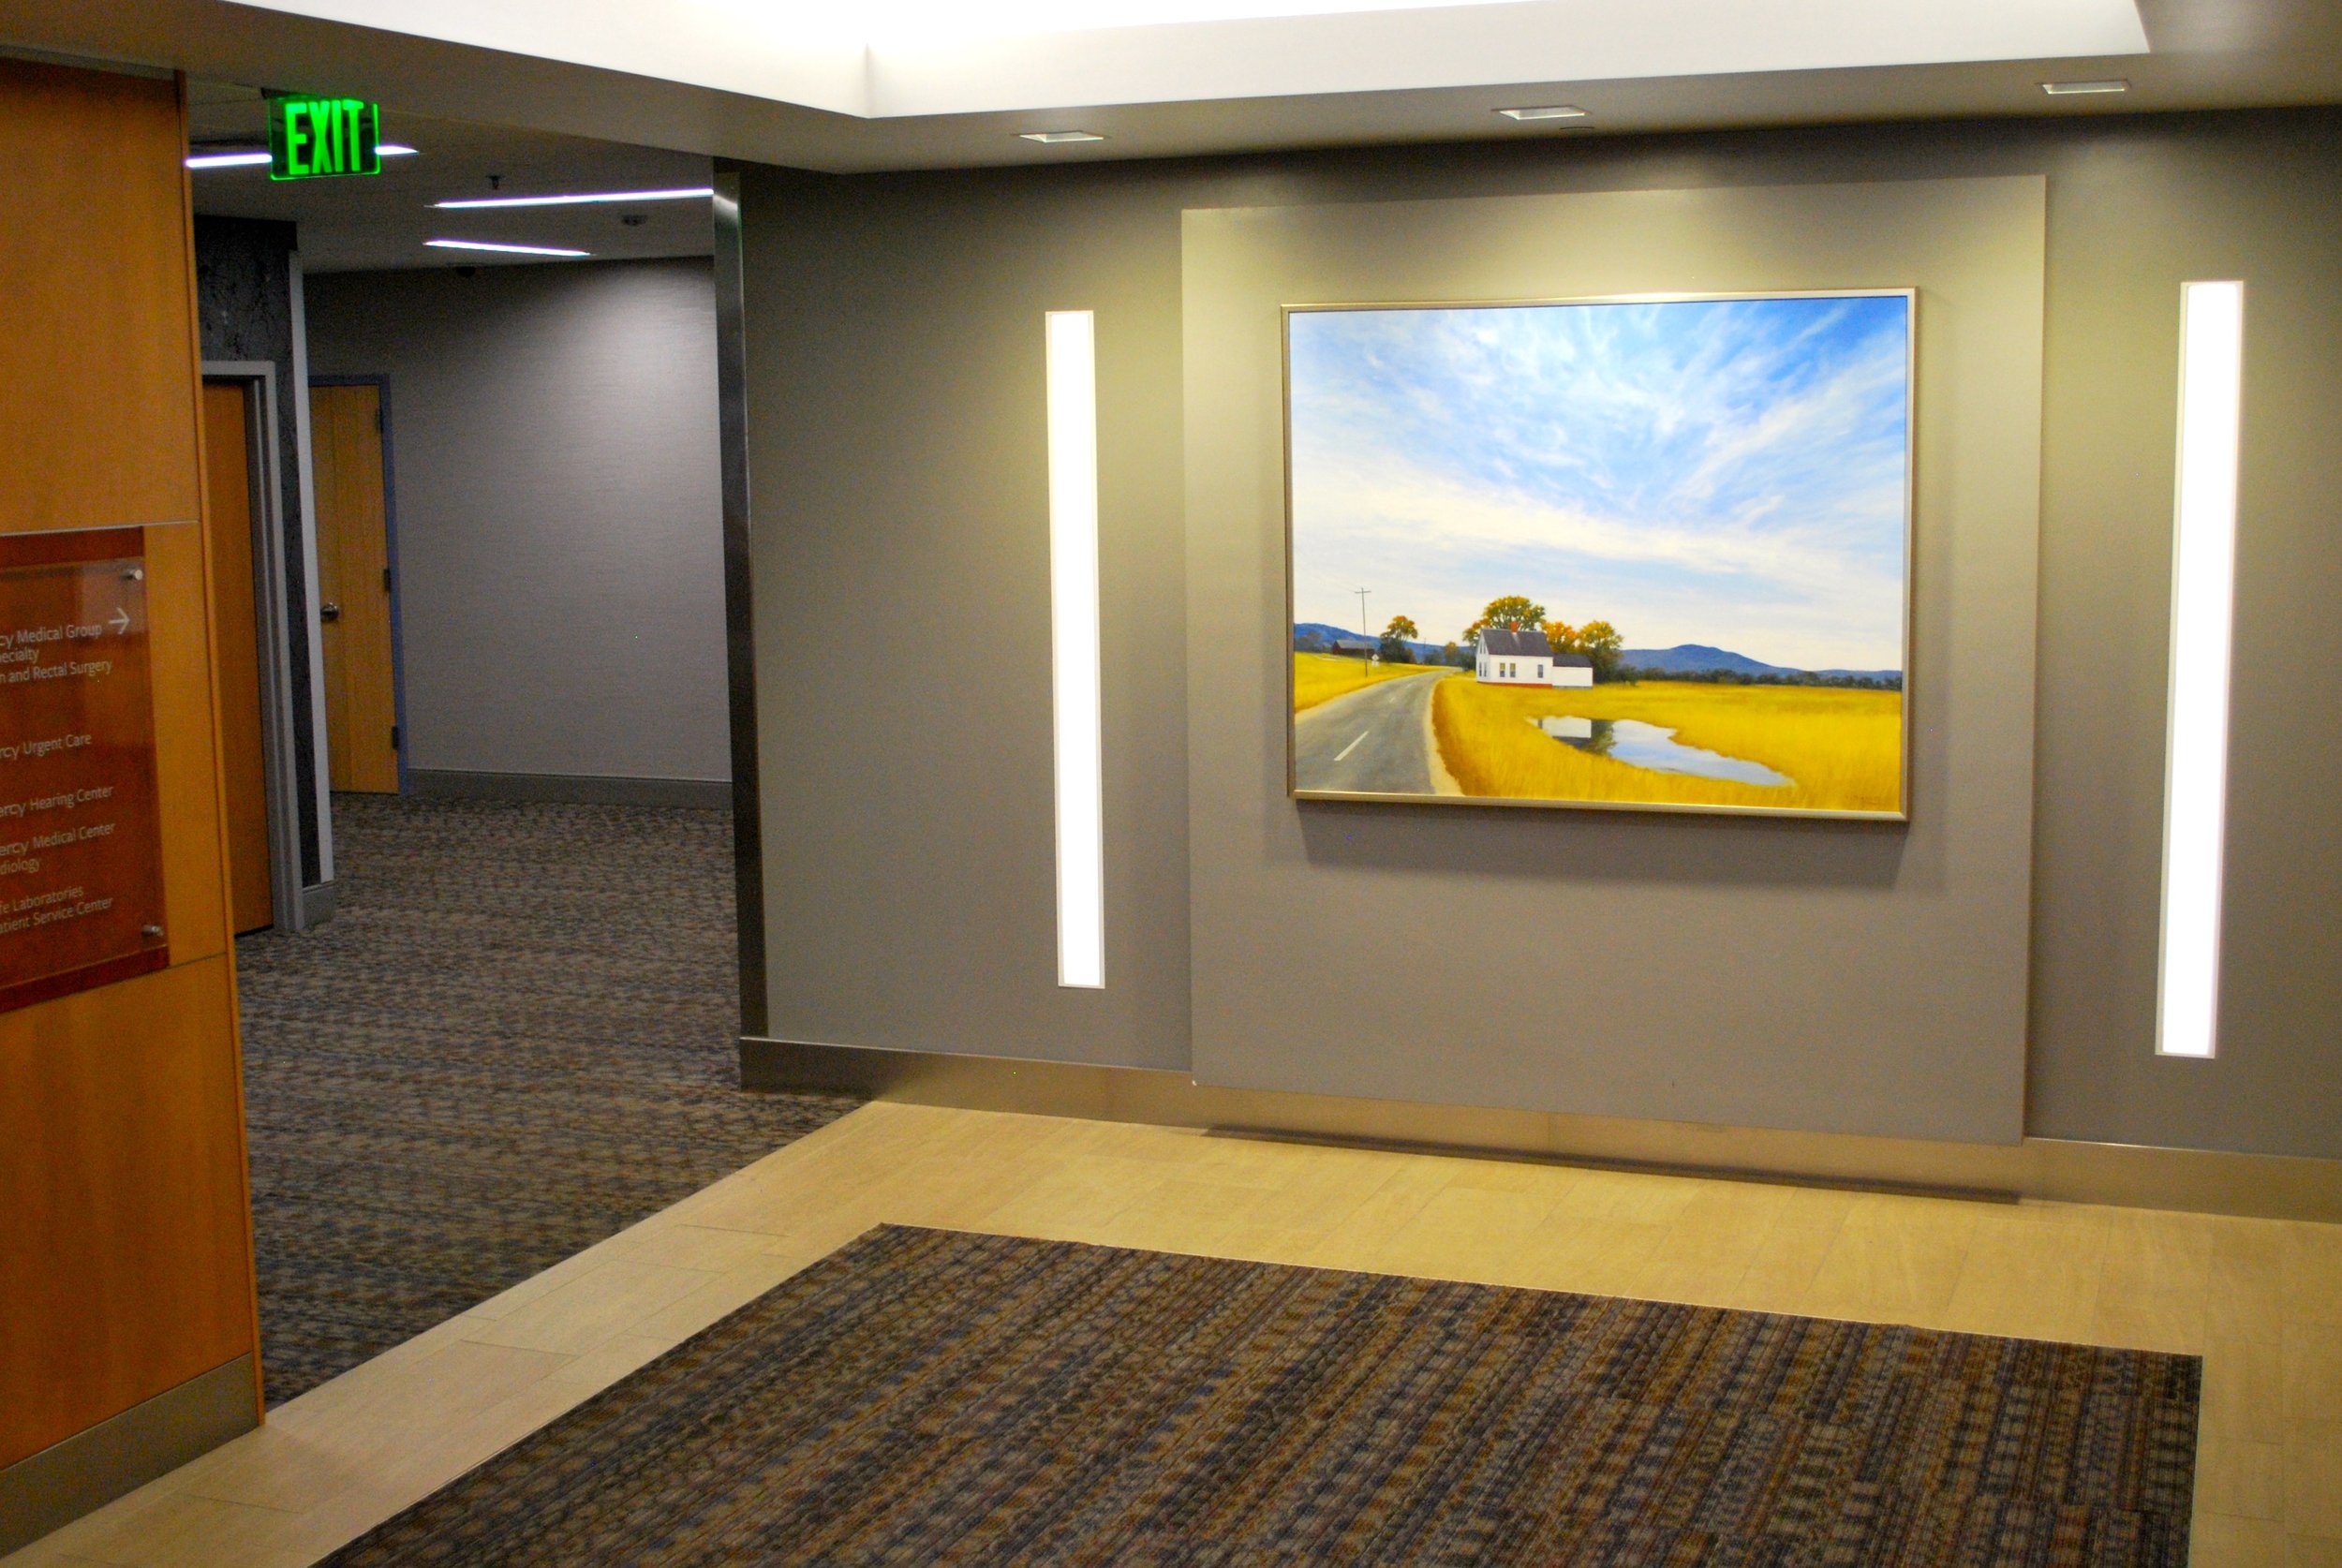 commercial real estate development investment MA CT cerw st lobby take 2 .jpg